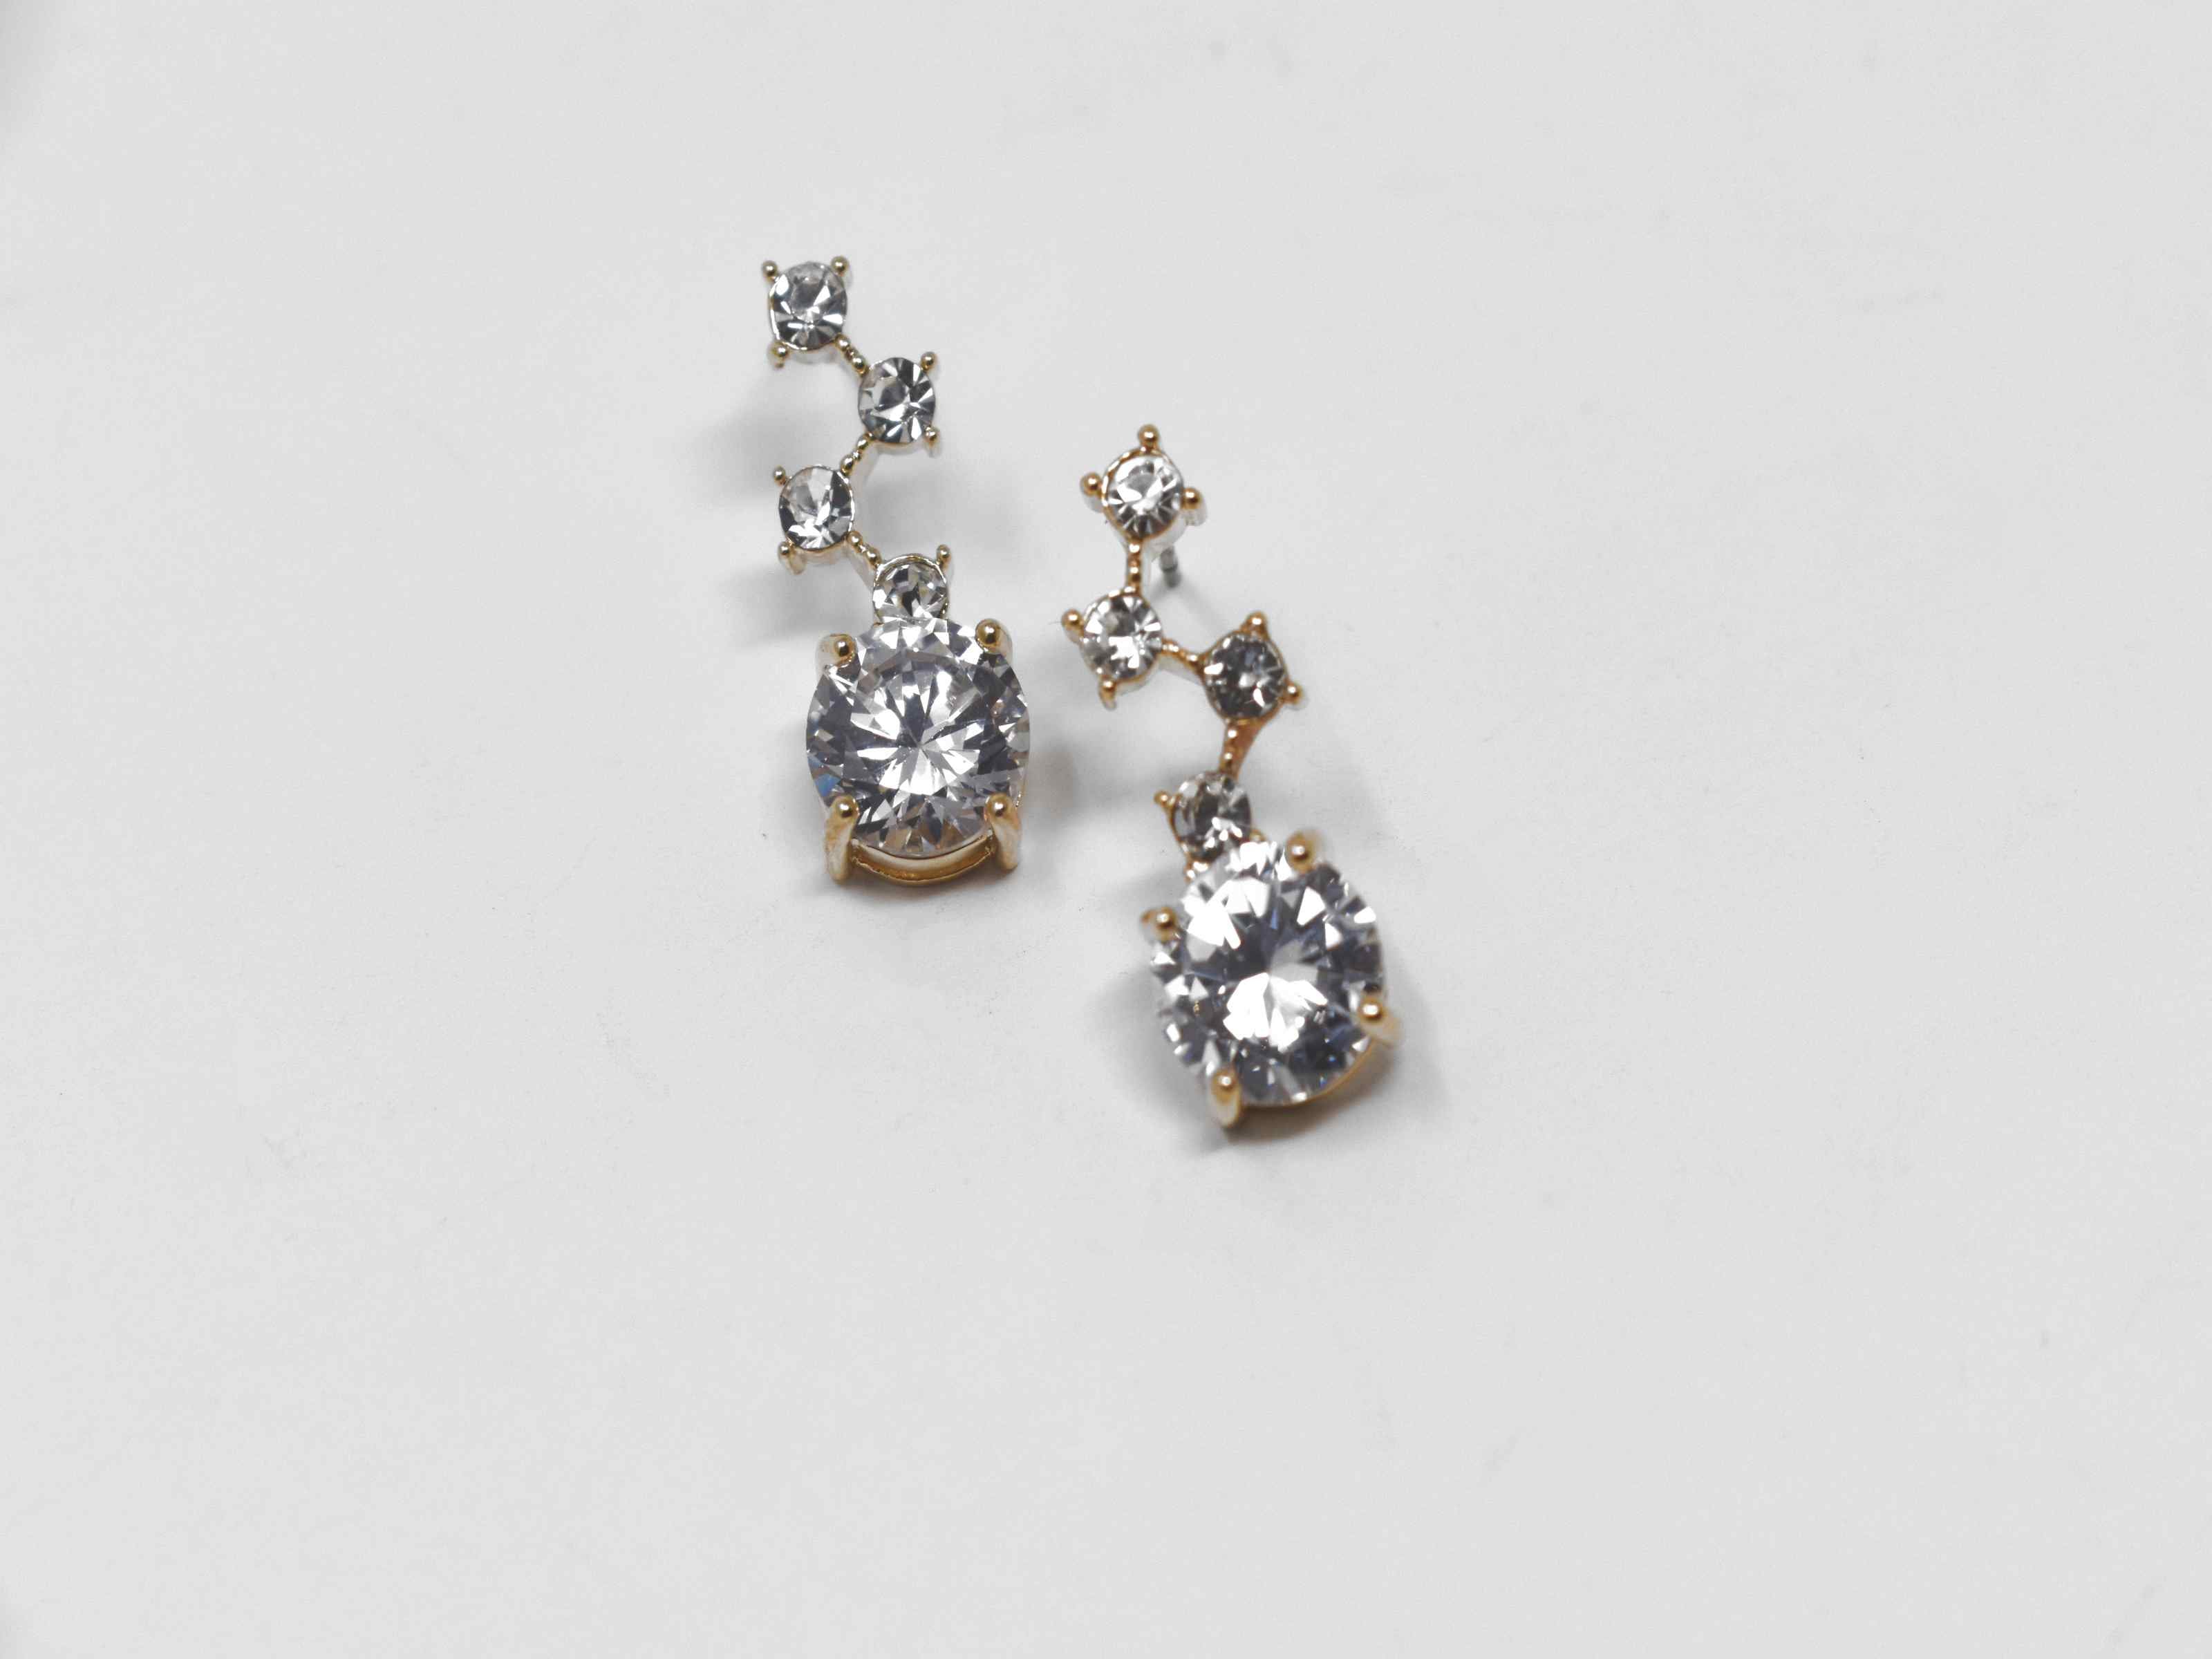 Our Flannel earrings are a must have! These gold earrings are a dangly knob connected with stones. It is 3/4 of an inch in length with a push back clasp.